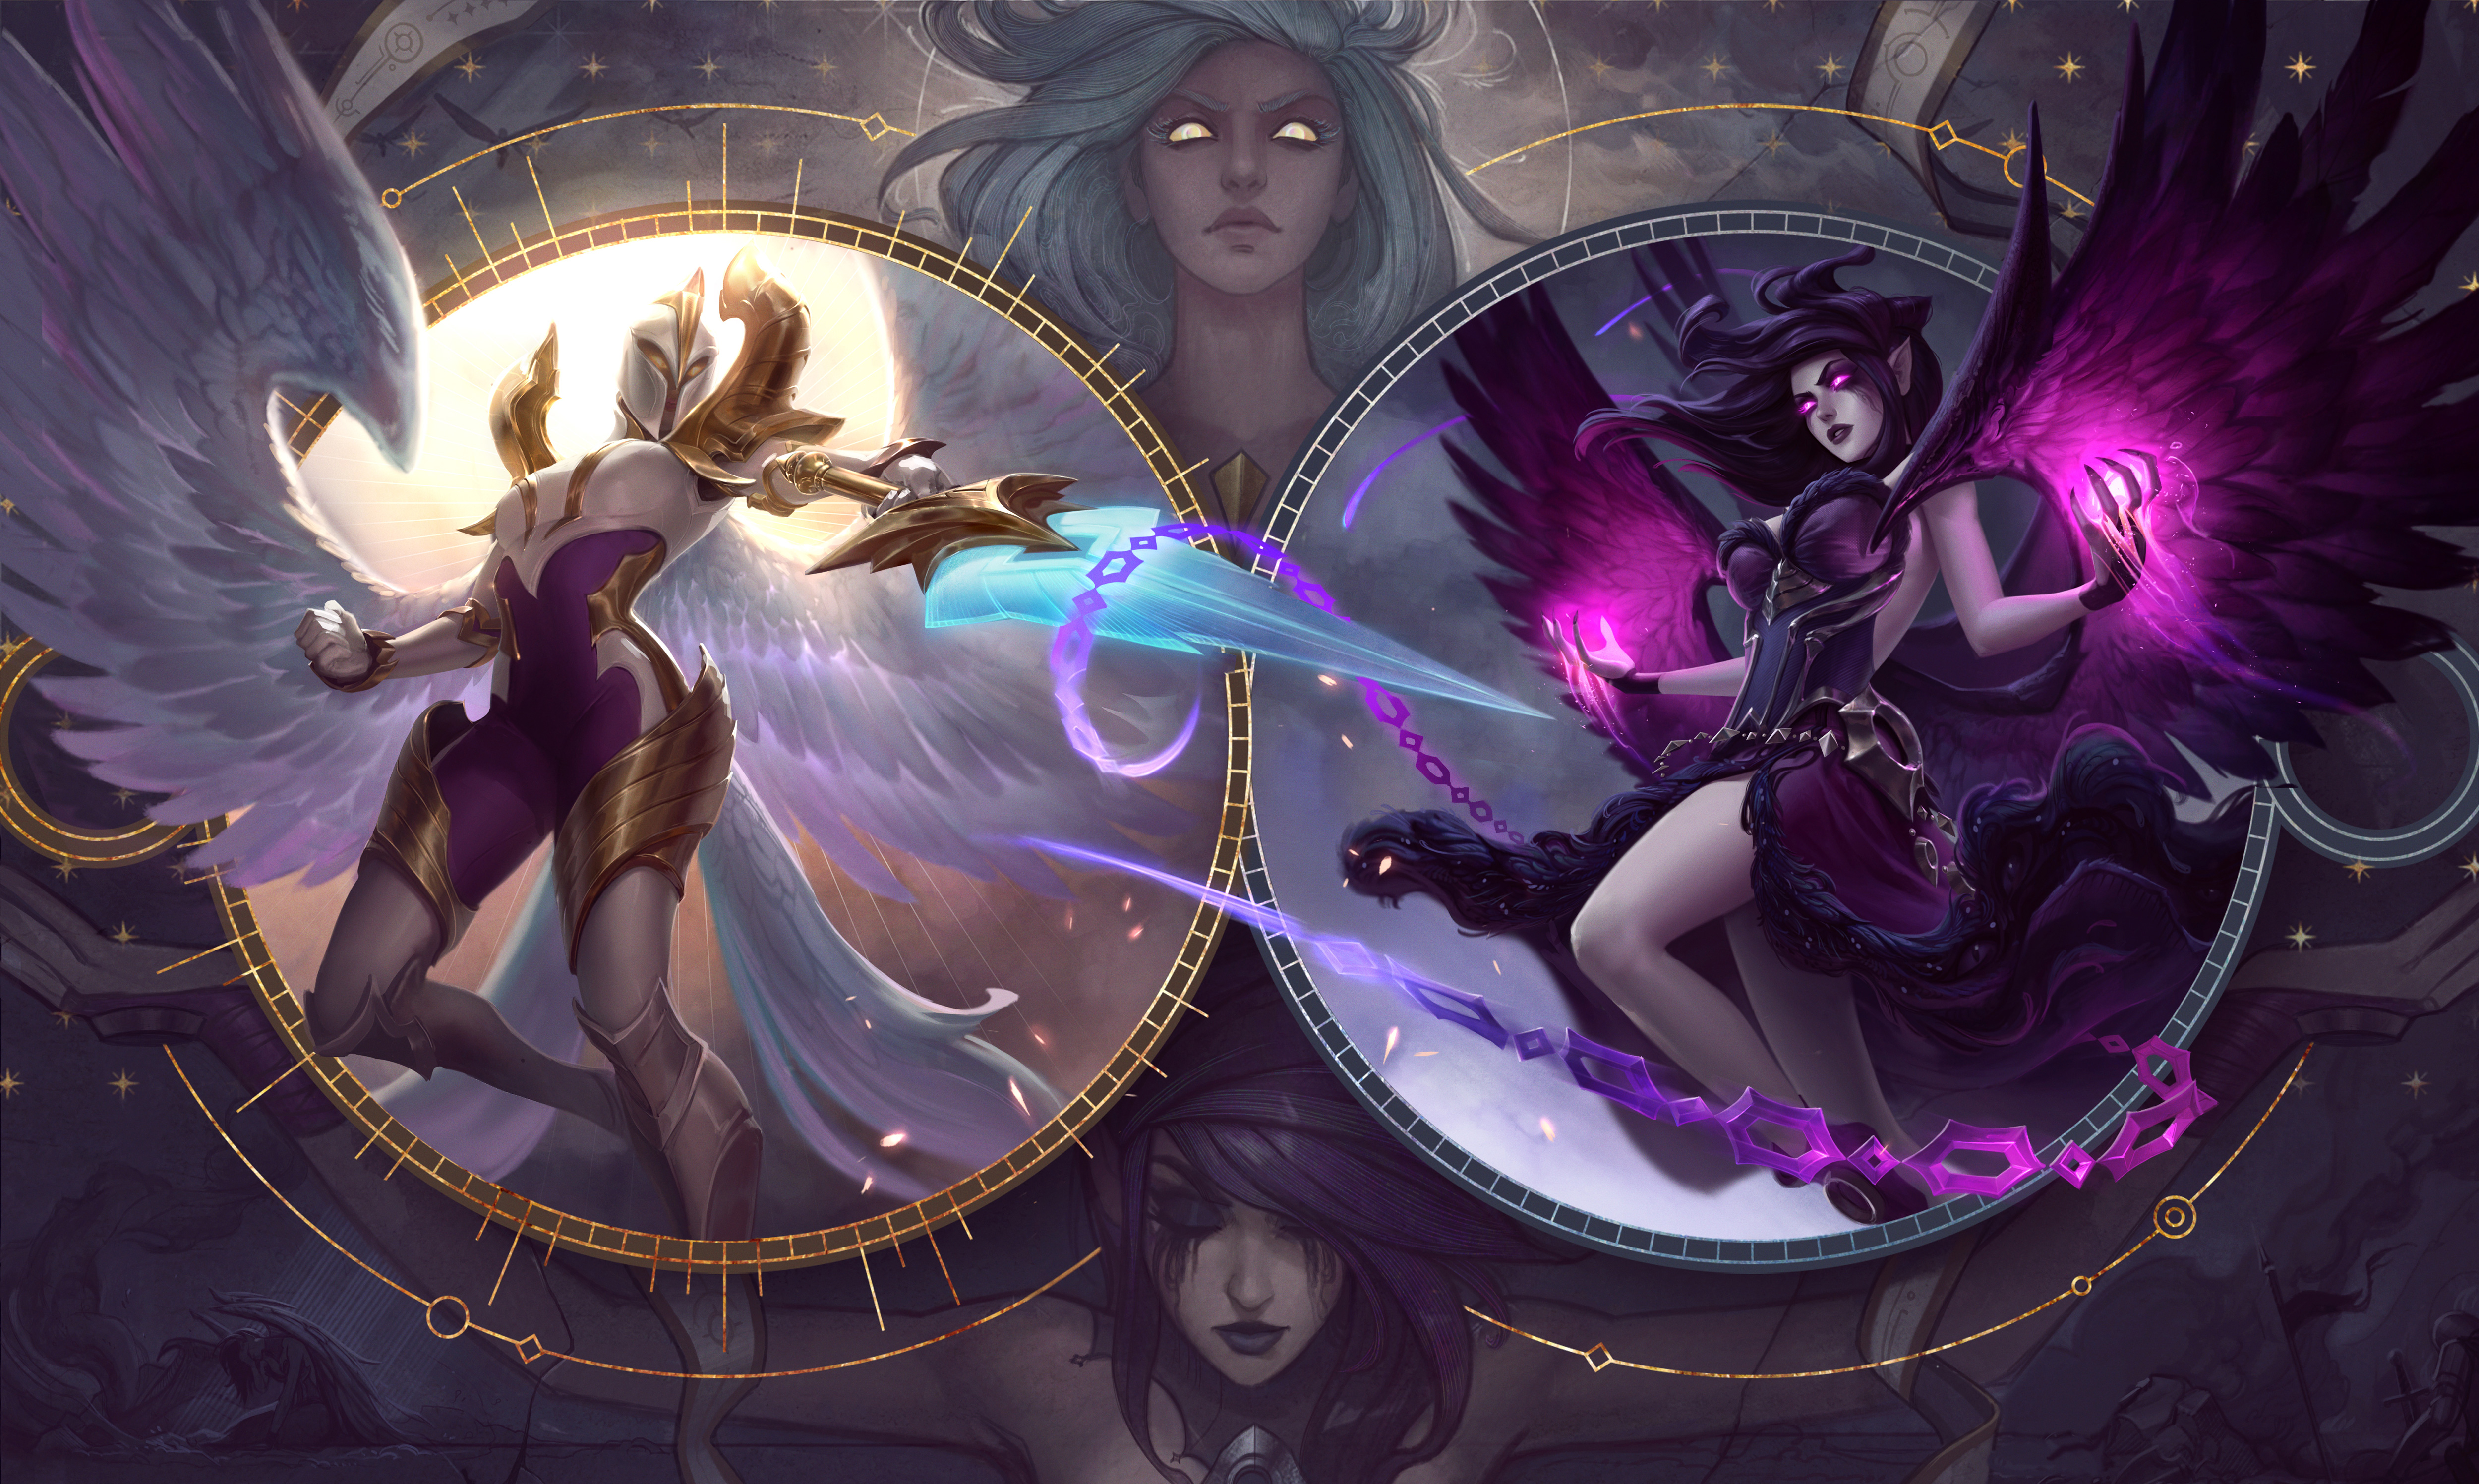 League Of Legends Morgana League Of Legends Kayle League Of Legends Glowing Eyes Wings Chains Mural 5000x2993